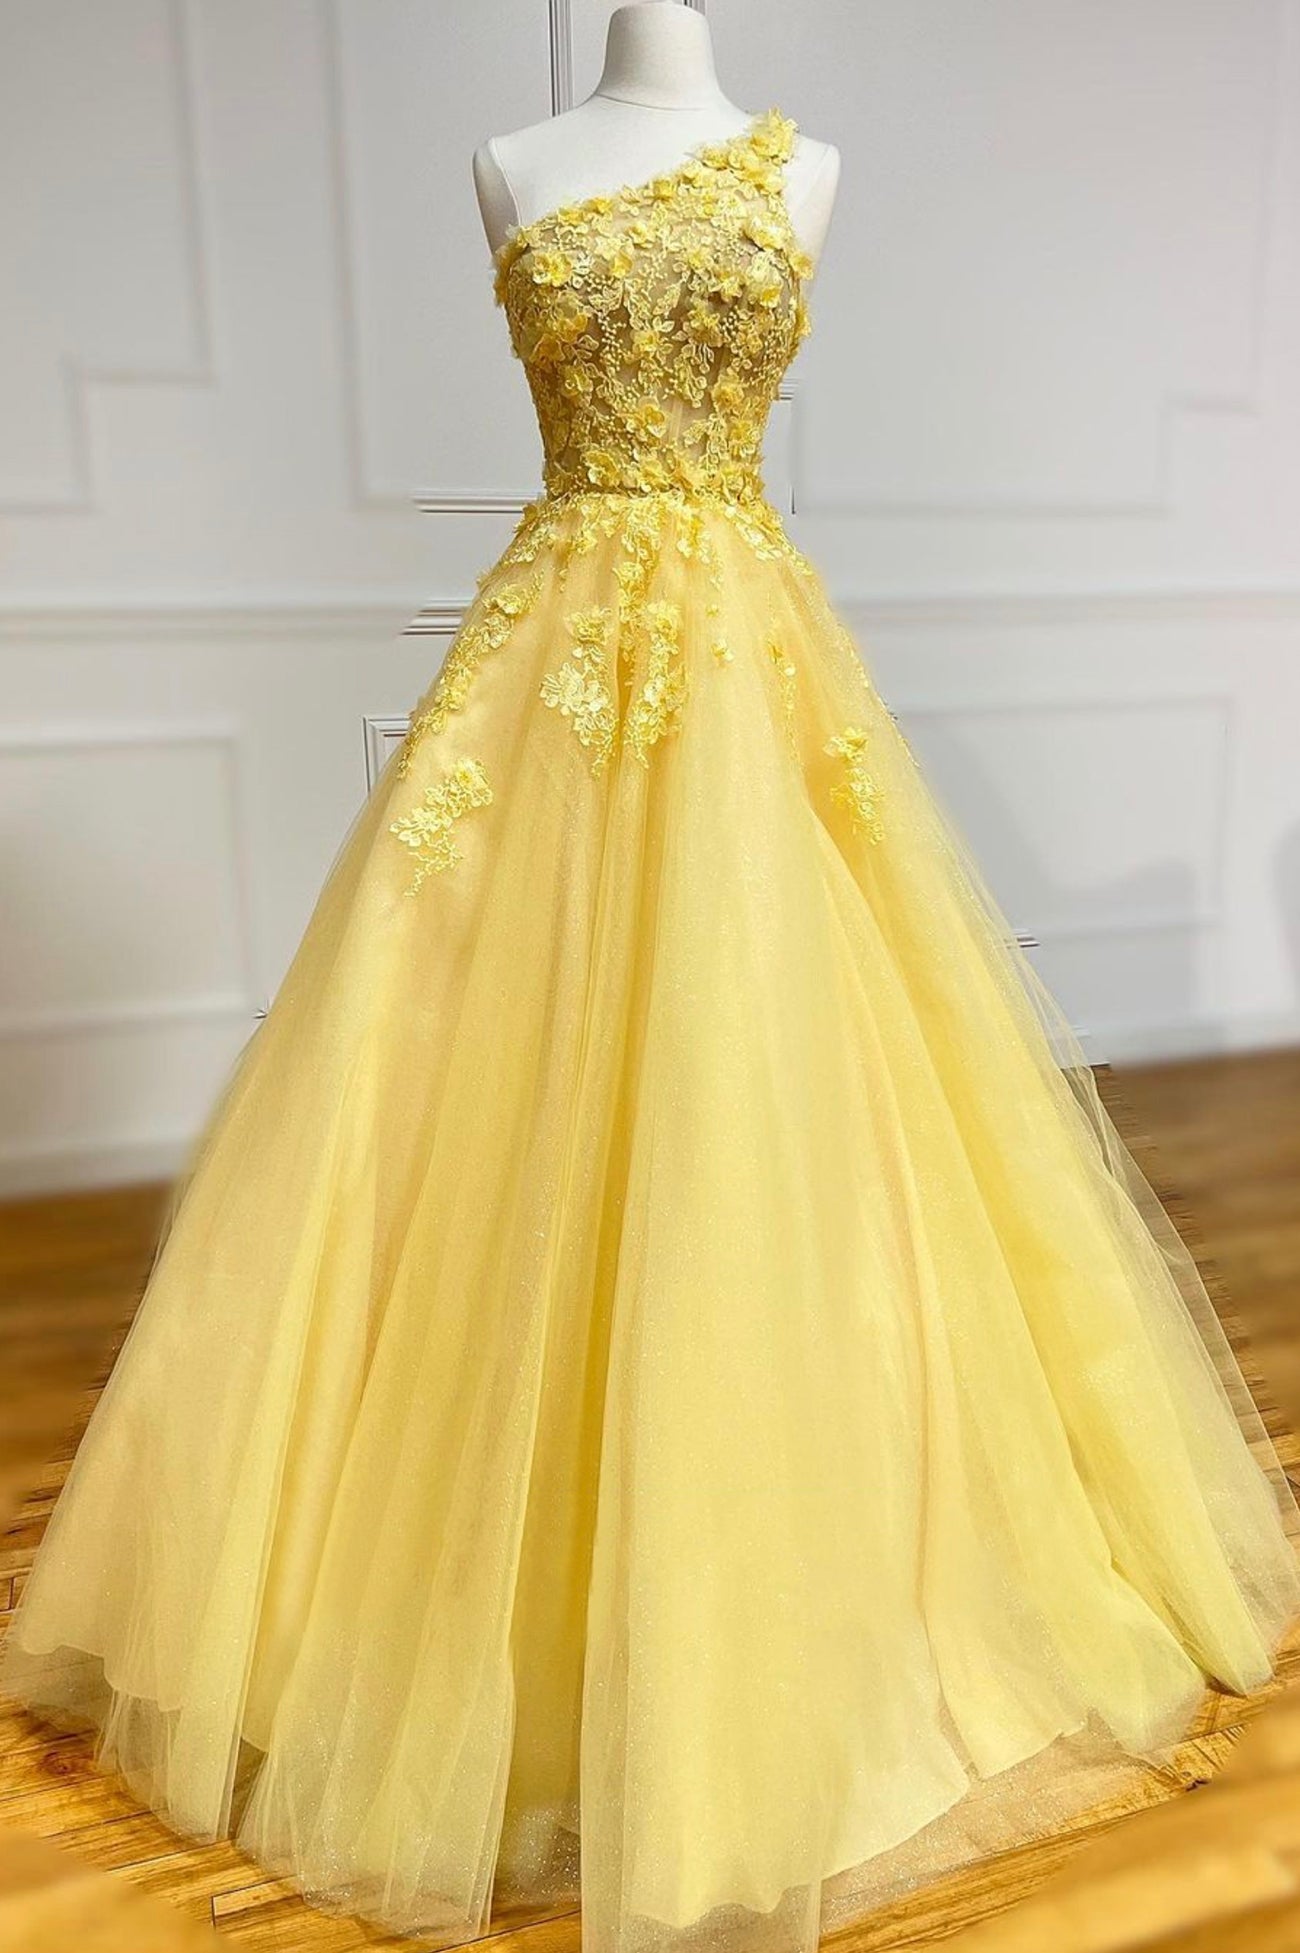 Formal Dresses Ideas, Yellow Lace One Shoulder Evening Dress, A-Line Tulle Long Prom Dress